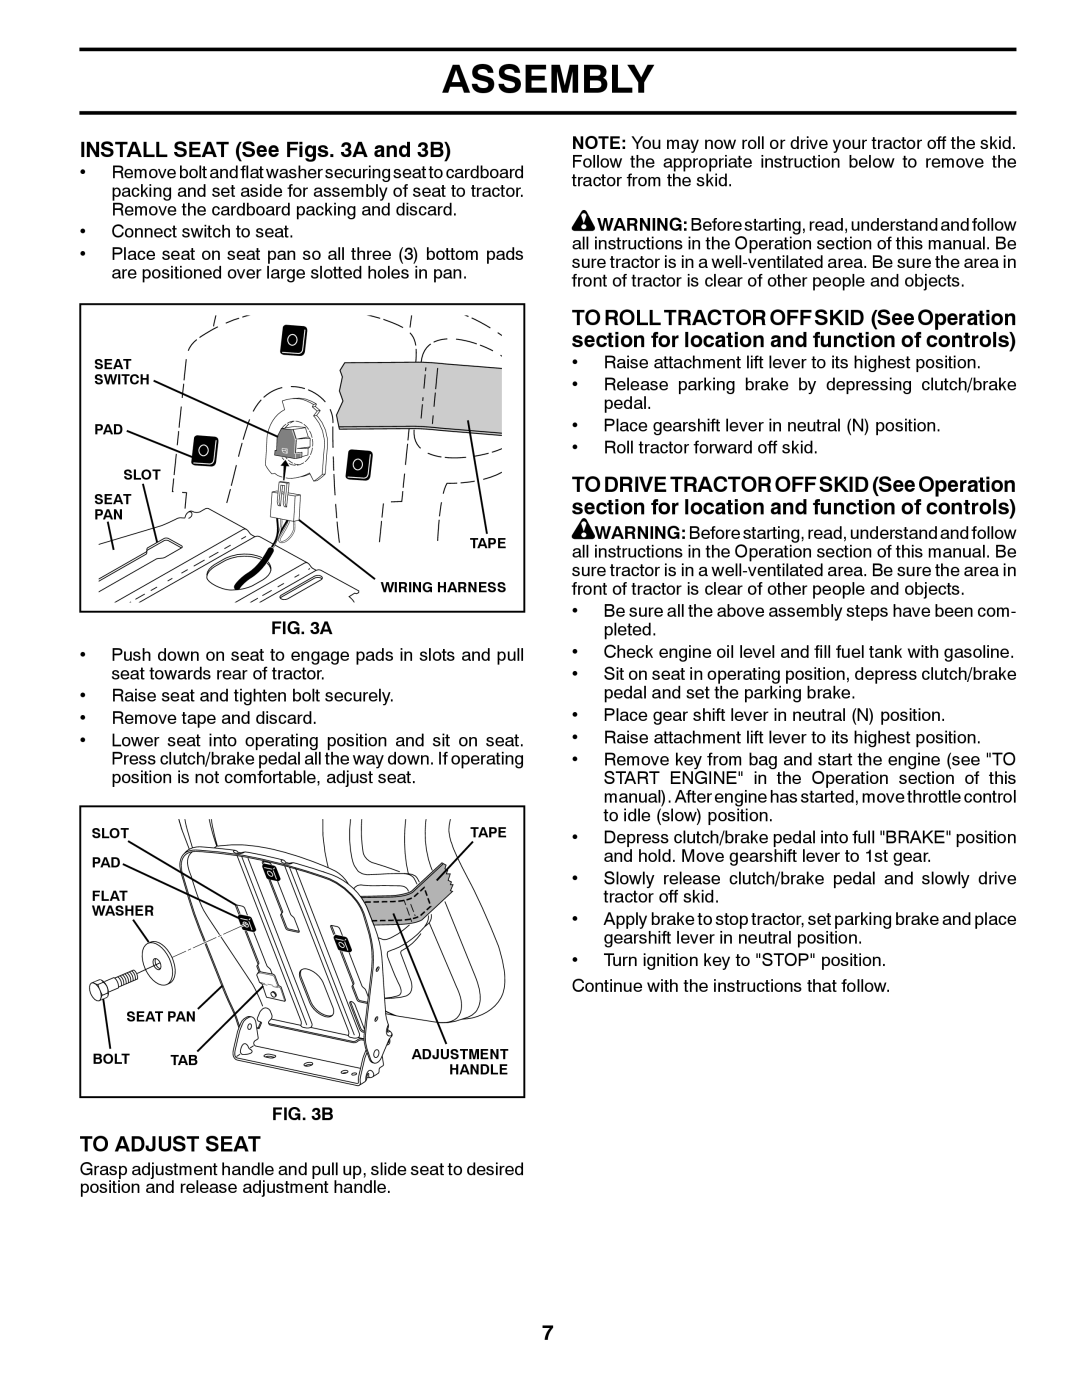 Husqvarna TS300-E3 manual INSTALL SEAT See Figs. 3A and 3B, To Adjust Seat, Assembly 